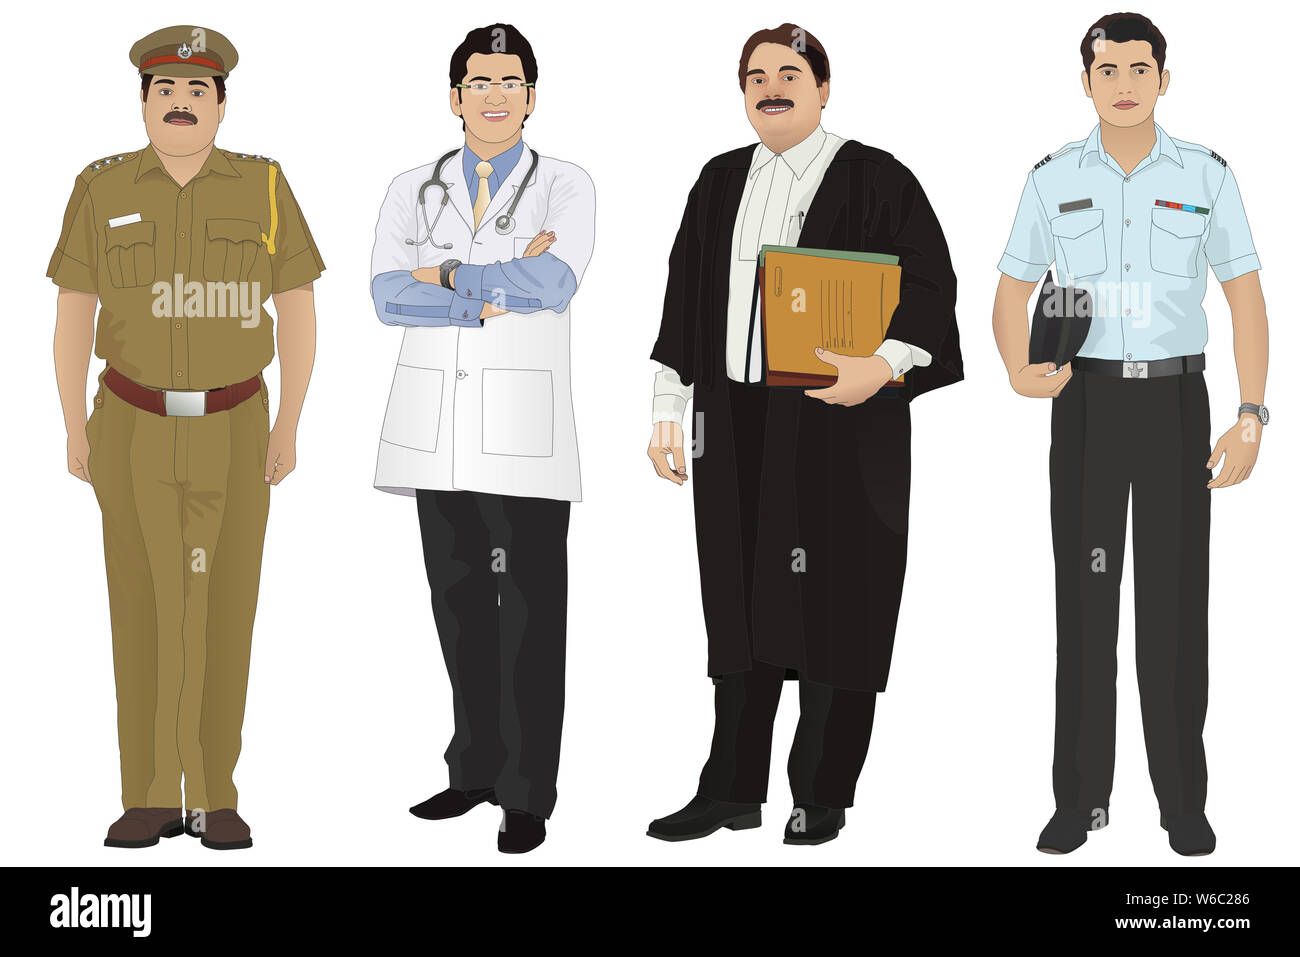 Men with different occupations Stock Photo